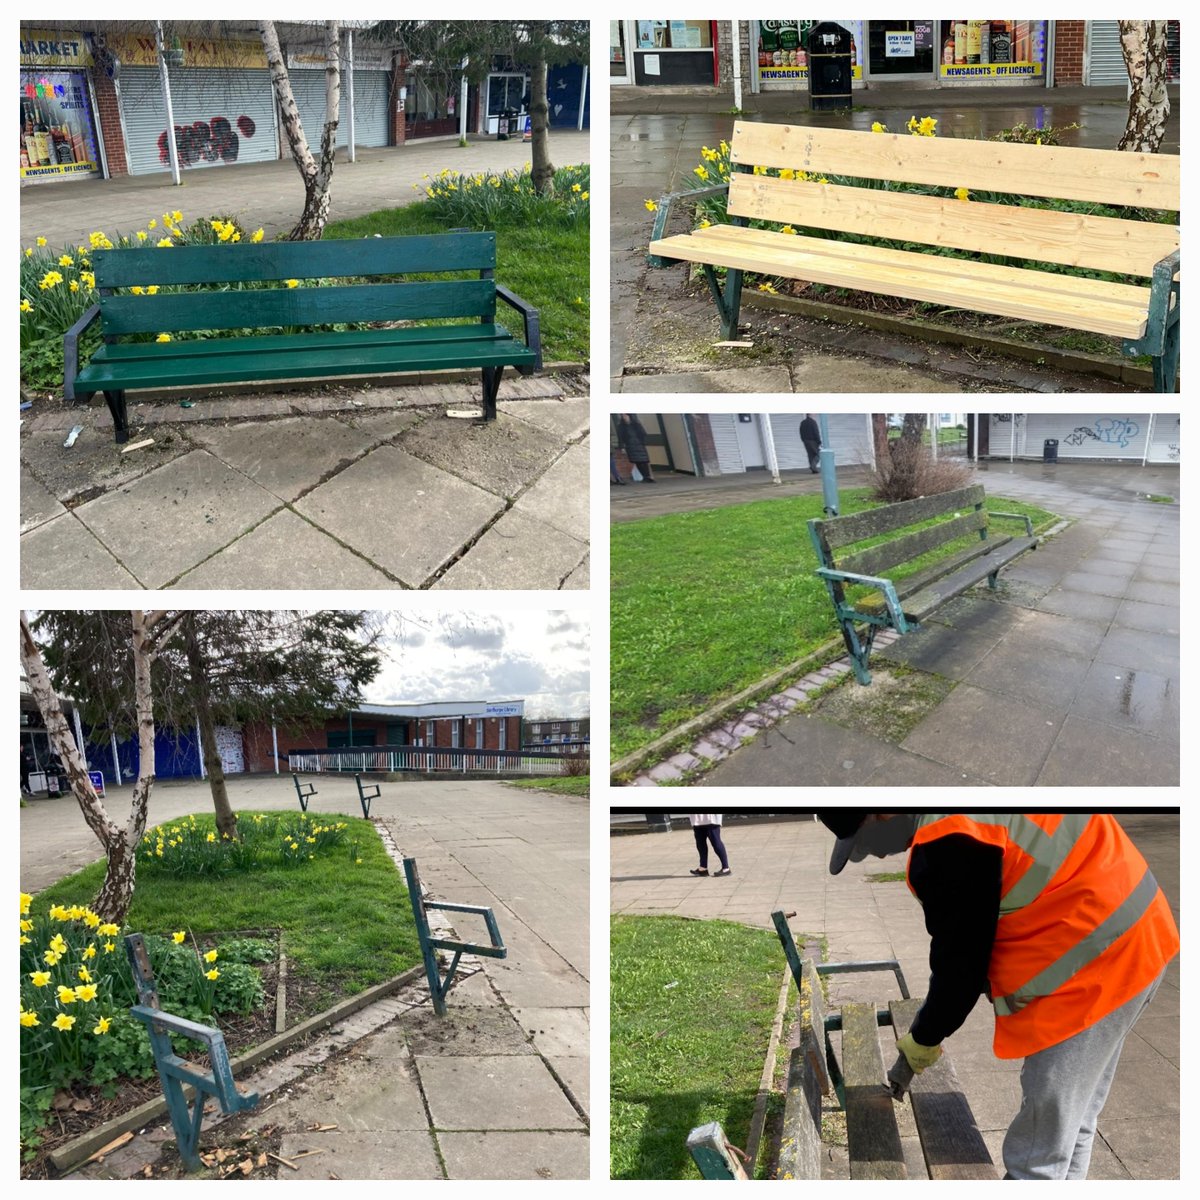 Shout out the community Pay back team for all their hard work over at Jordanthorpe! Check out the before and after snaps Just in time ready for half term🥳 #benches #community #shoppingarea #Jordanthorpe #wecan @StavesGlyn